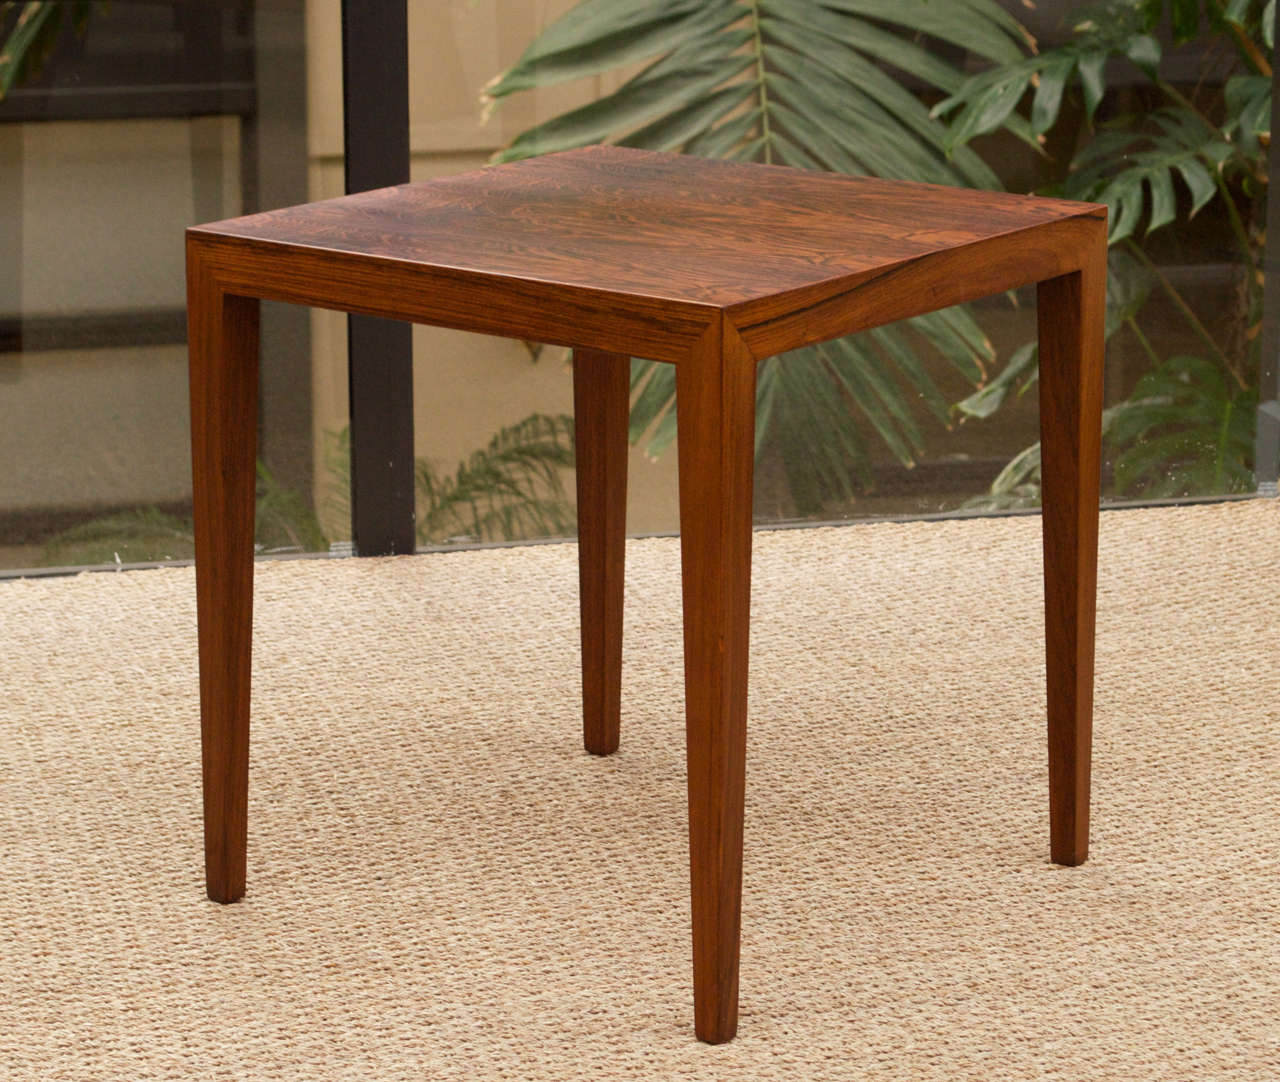 A Severin Hansen Jr. End Table in Brazilian Rosewood. Manufactured
and Labeled by Haslev Mobelfabrik.